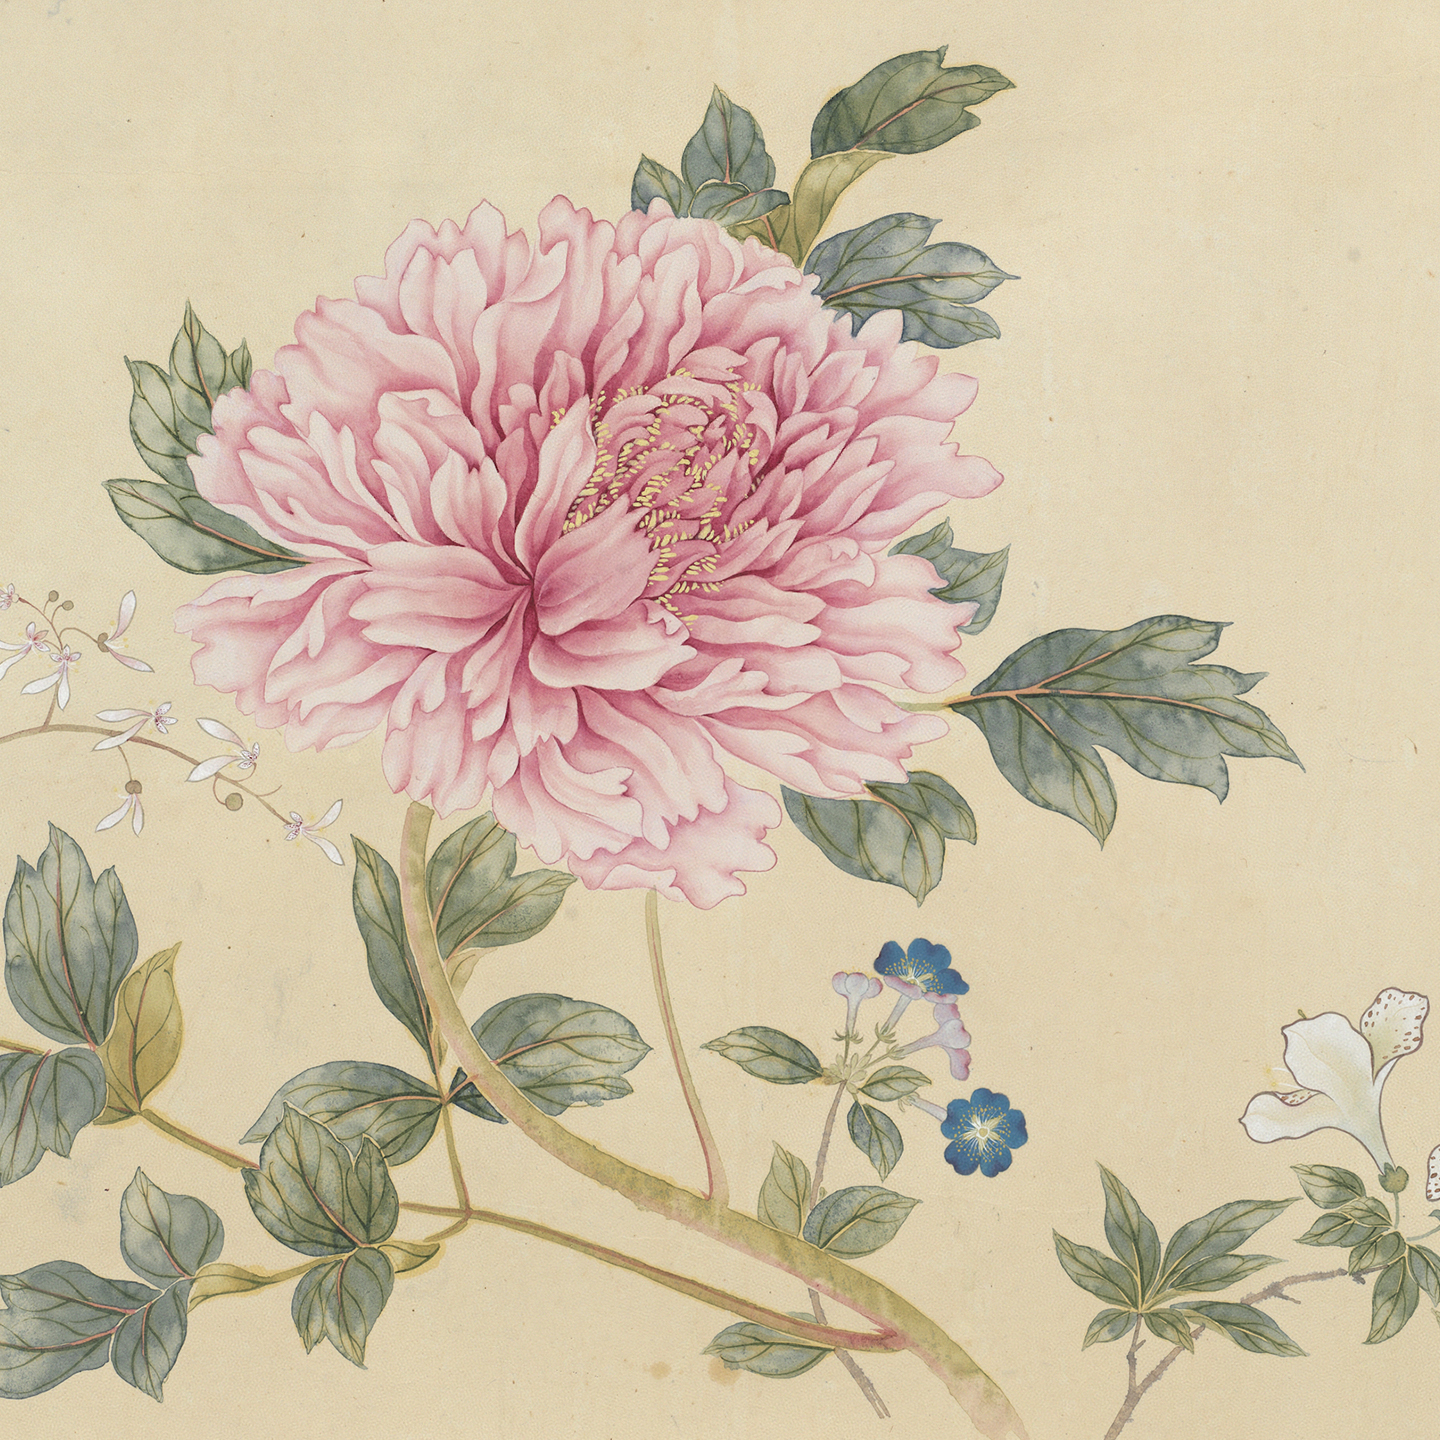 Spring Fortune Collected in a Brocade